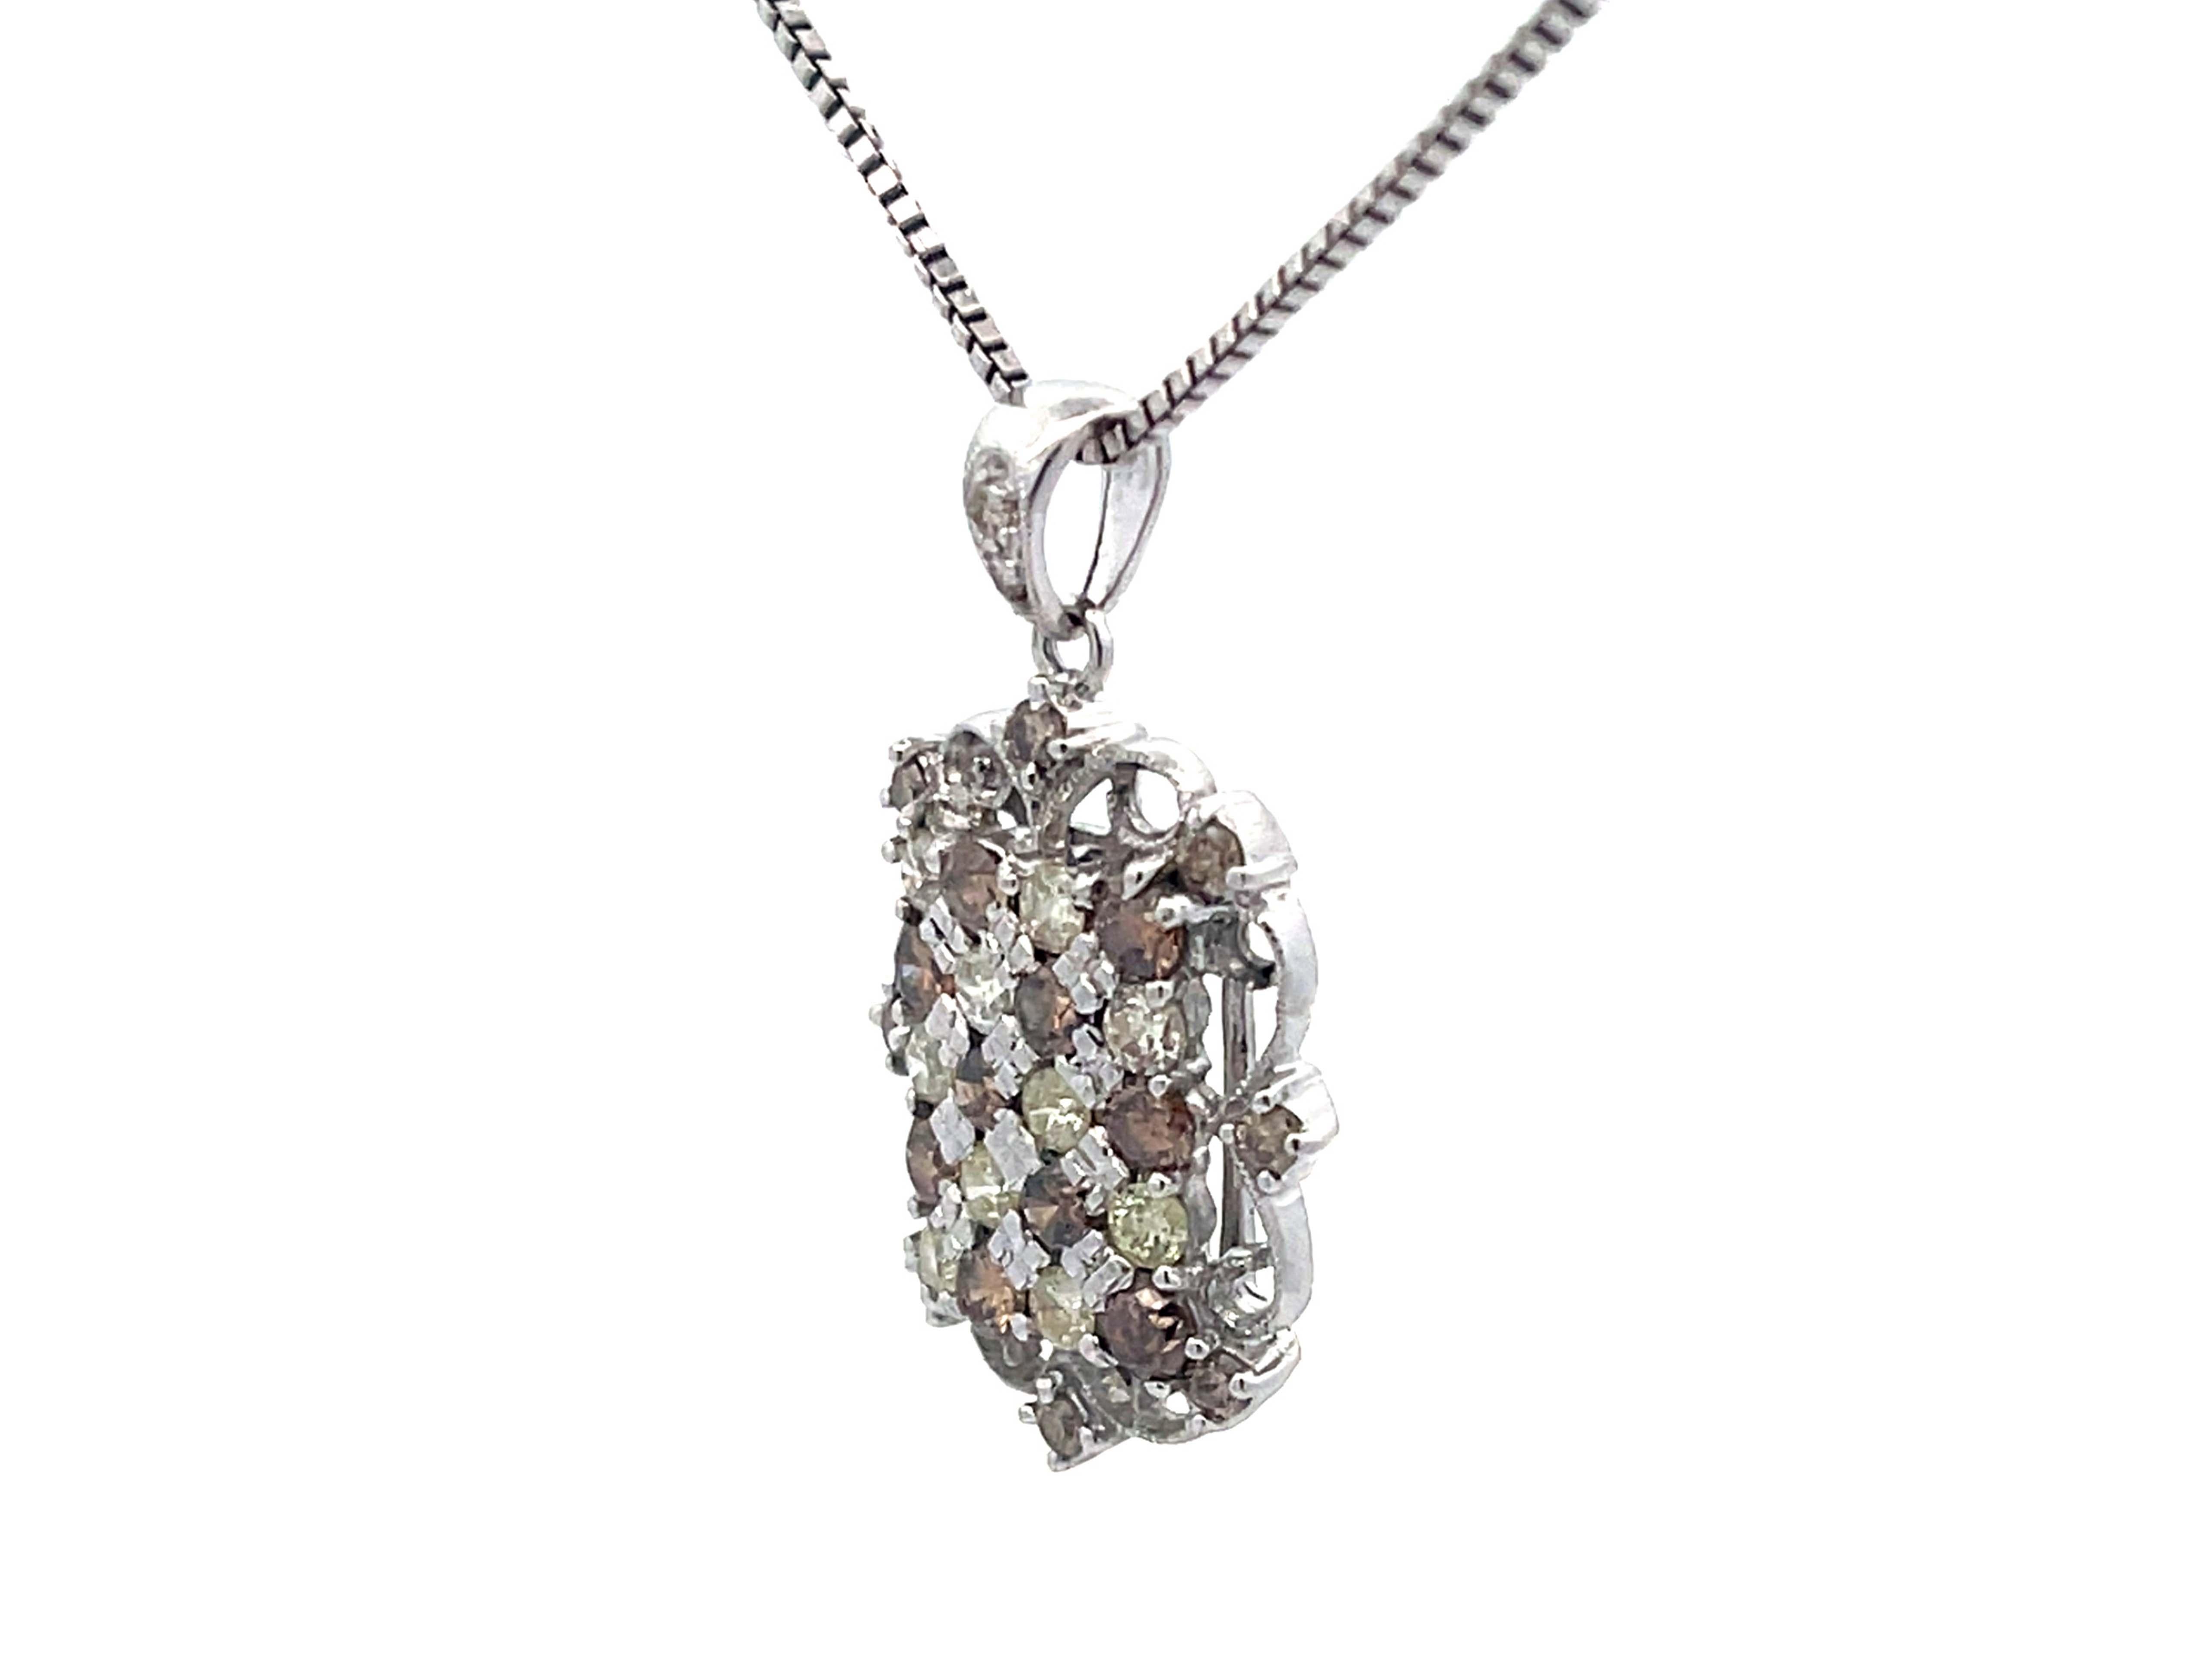 Multi Color Diamond Pendant on Chain in 18K White Gold In Excellent Condition For Sale In Honolulu, HI